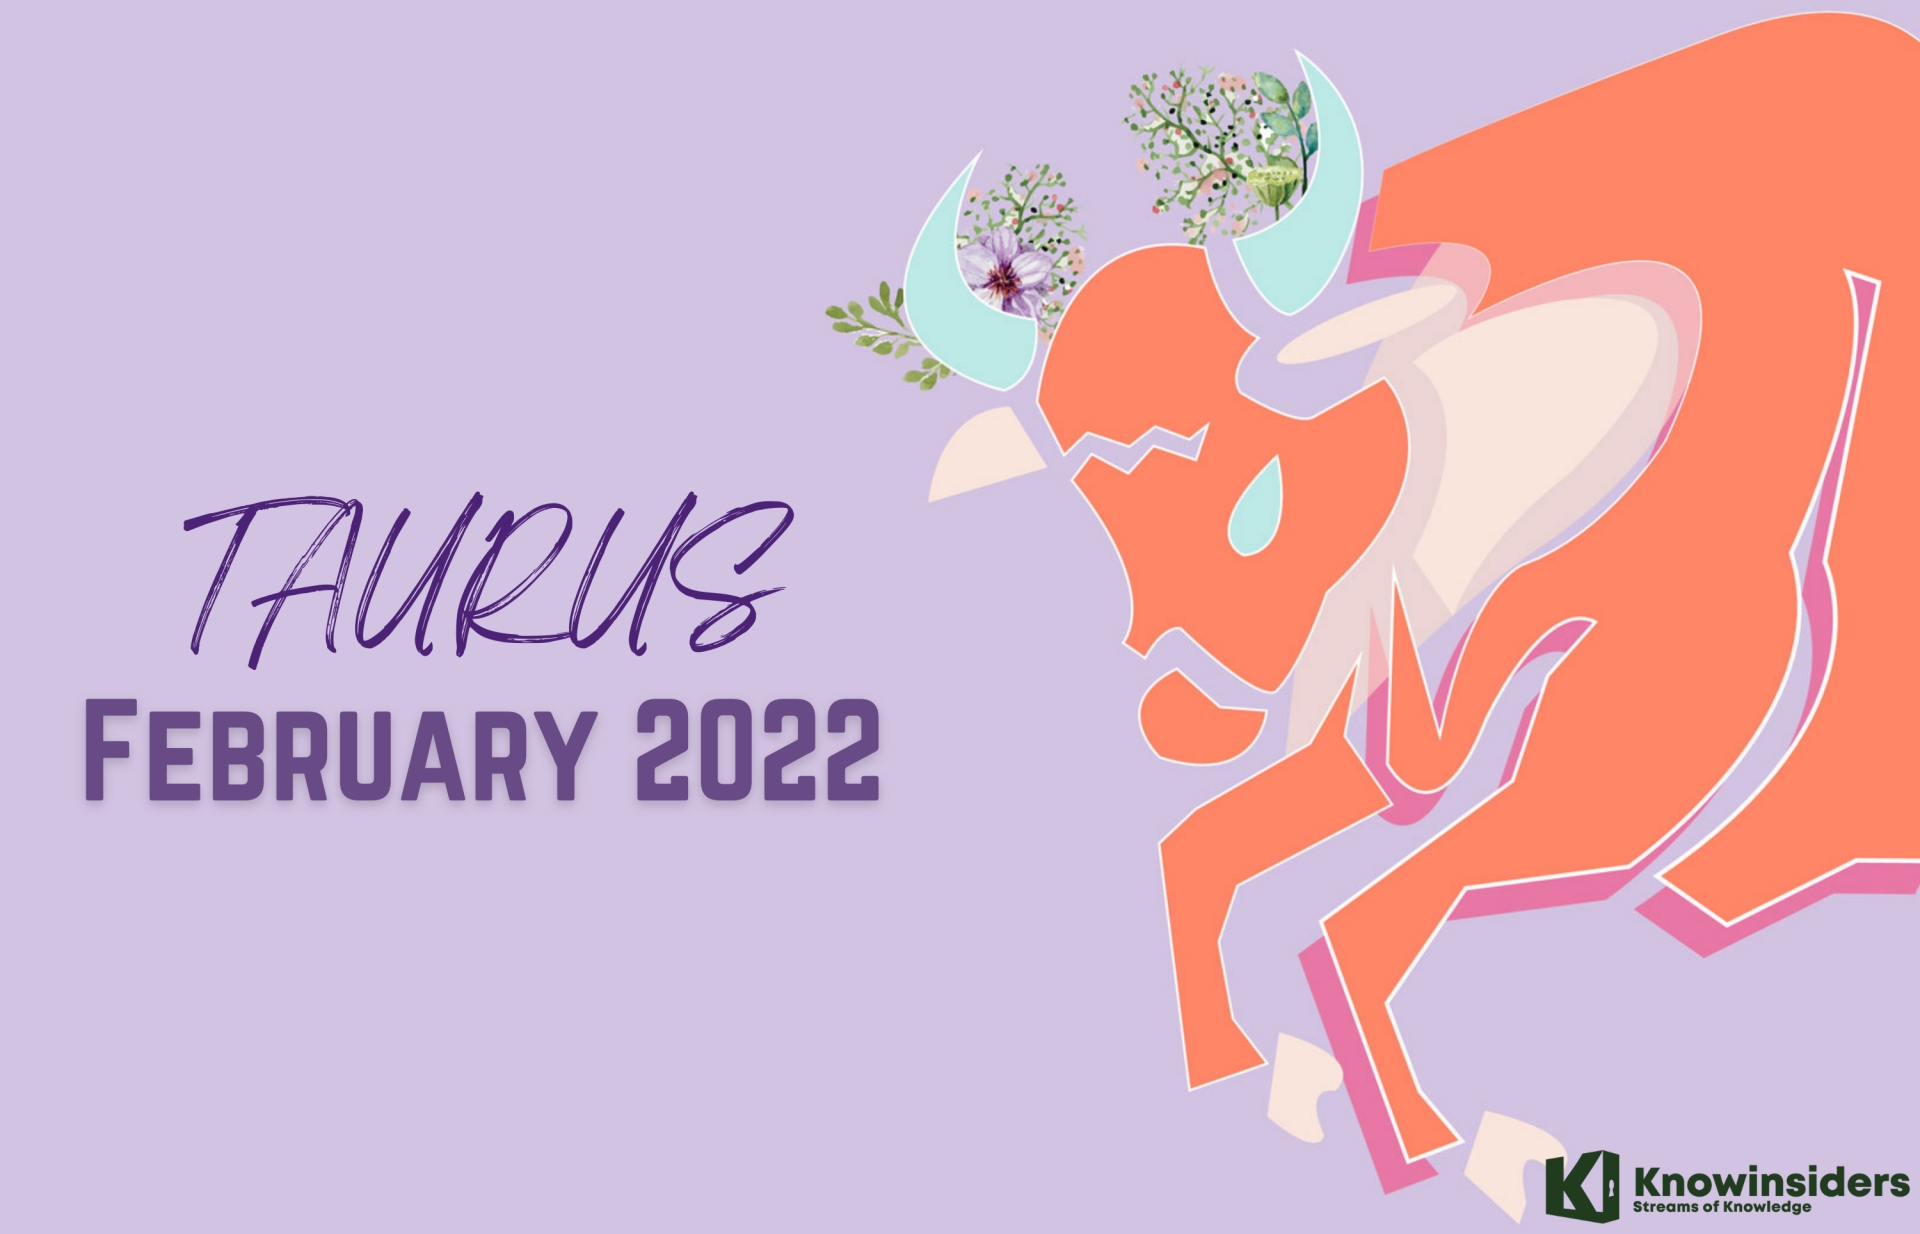 TAURUS February 2022 Horoscope: Monthly Prediction for Love, Career, Money and Health